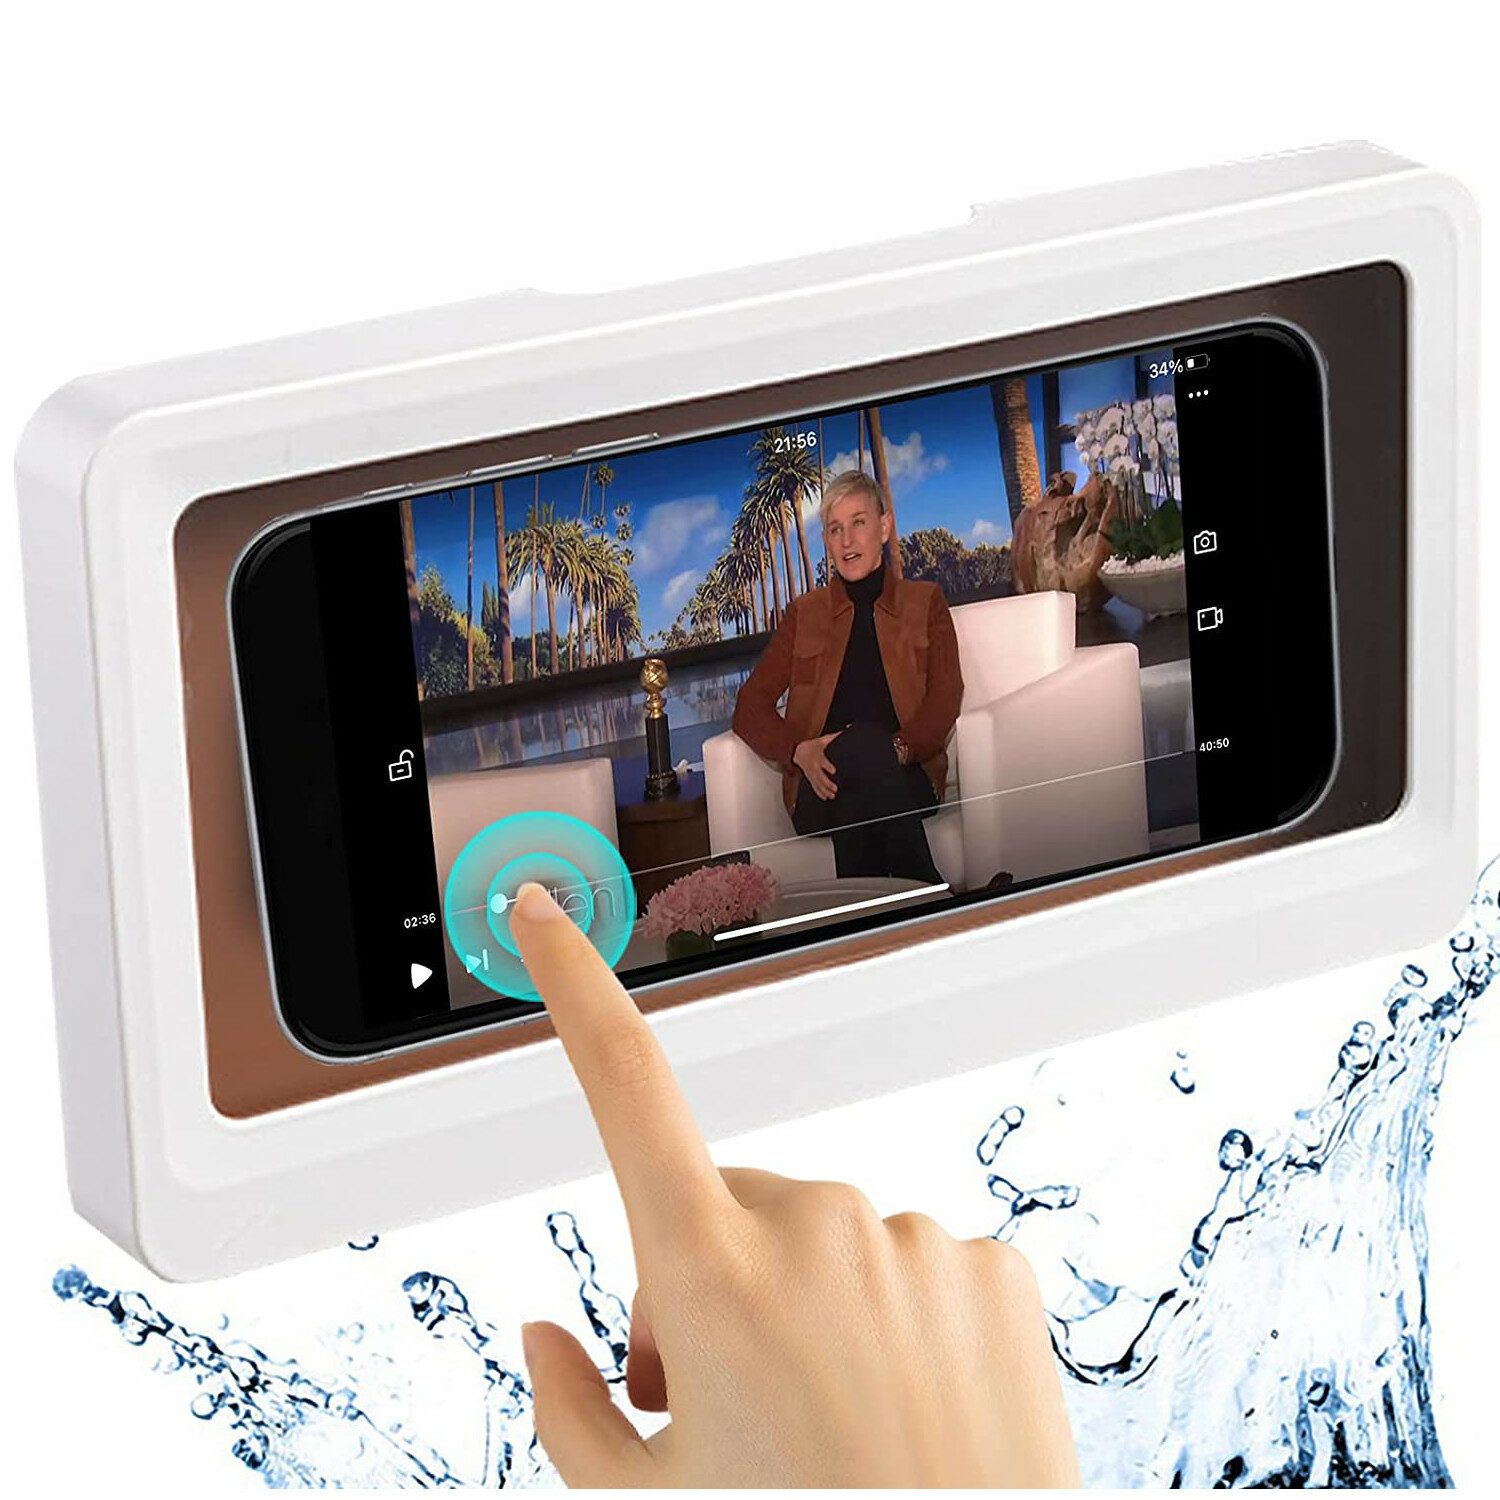 Bakeey Shower Phone Holder Case Touch Screen Mobile Cell Phone Holder Case Wall Mount Storage Box Wa